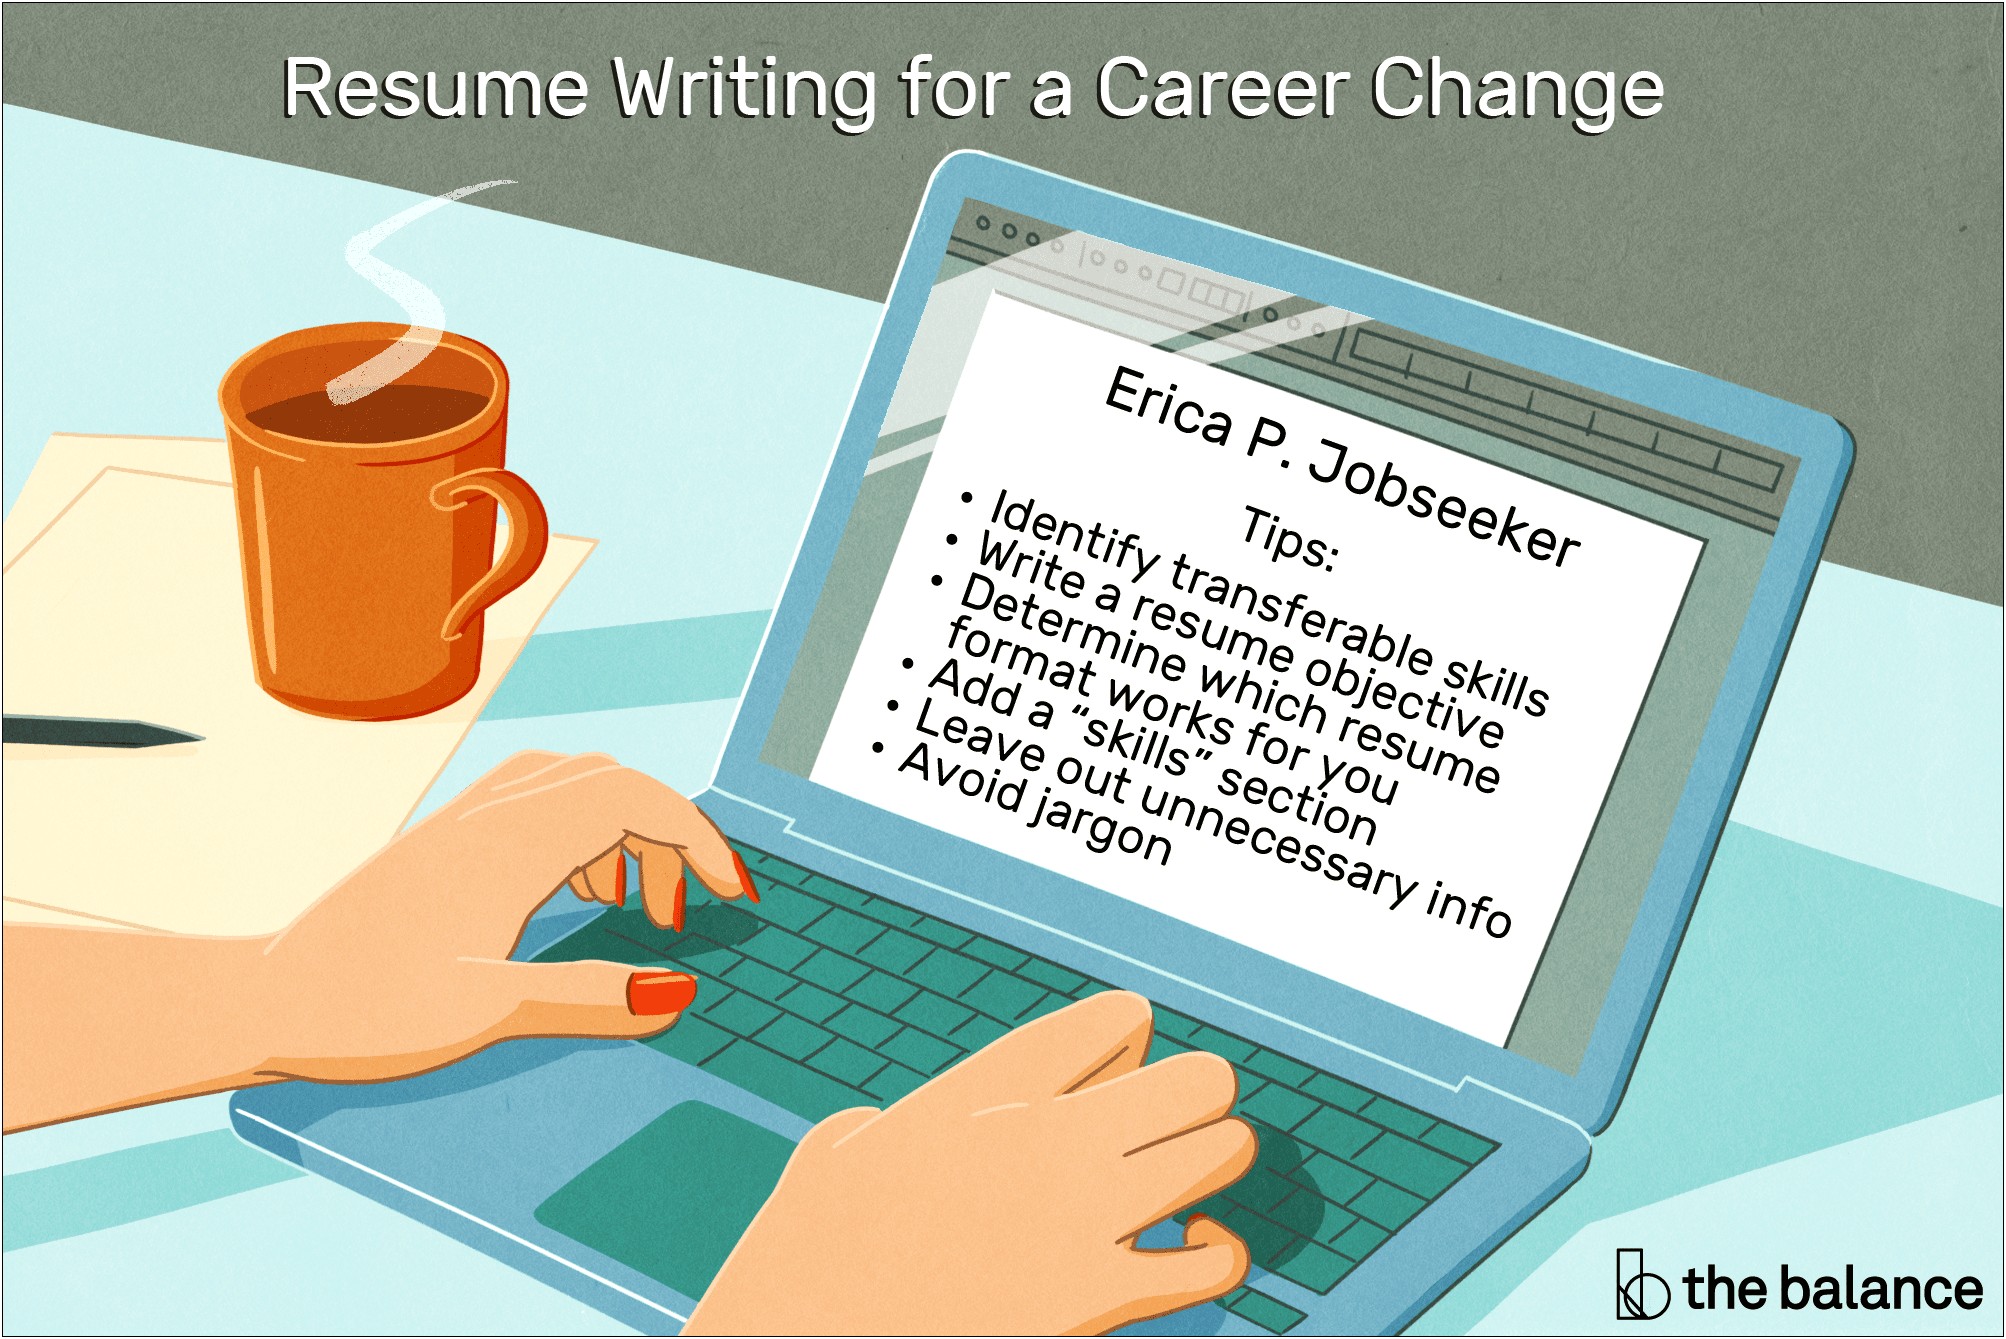 Resume Objectives For Starting A New Career